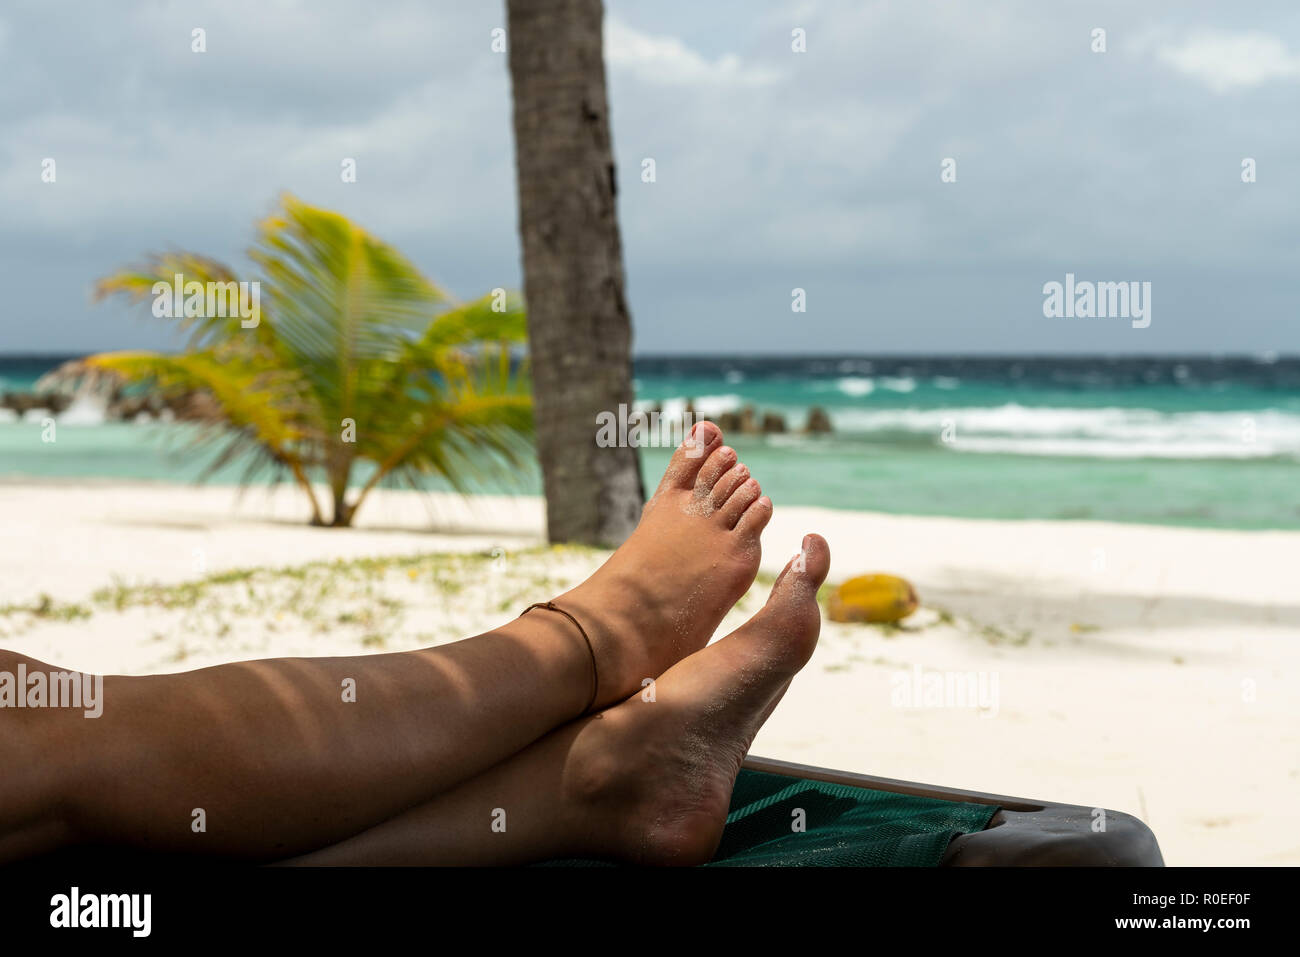 A woman is relaxing on a beach at the Maldives. Stock Photo